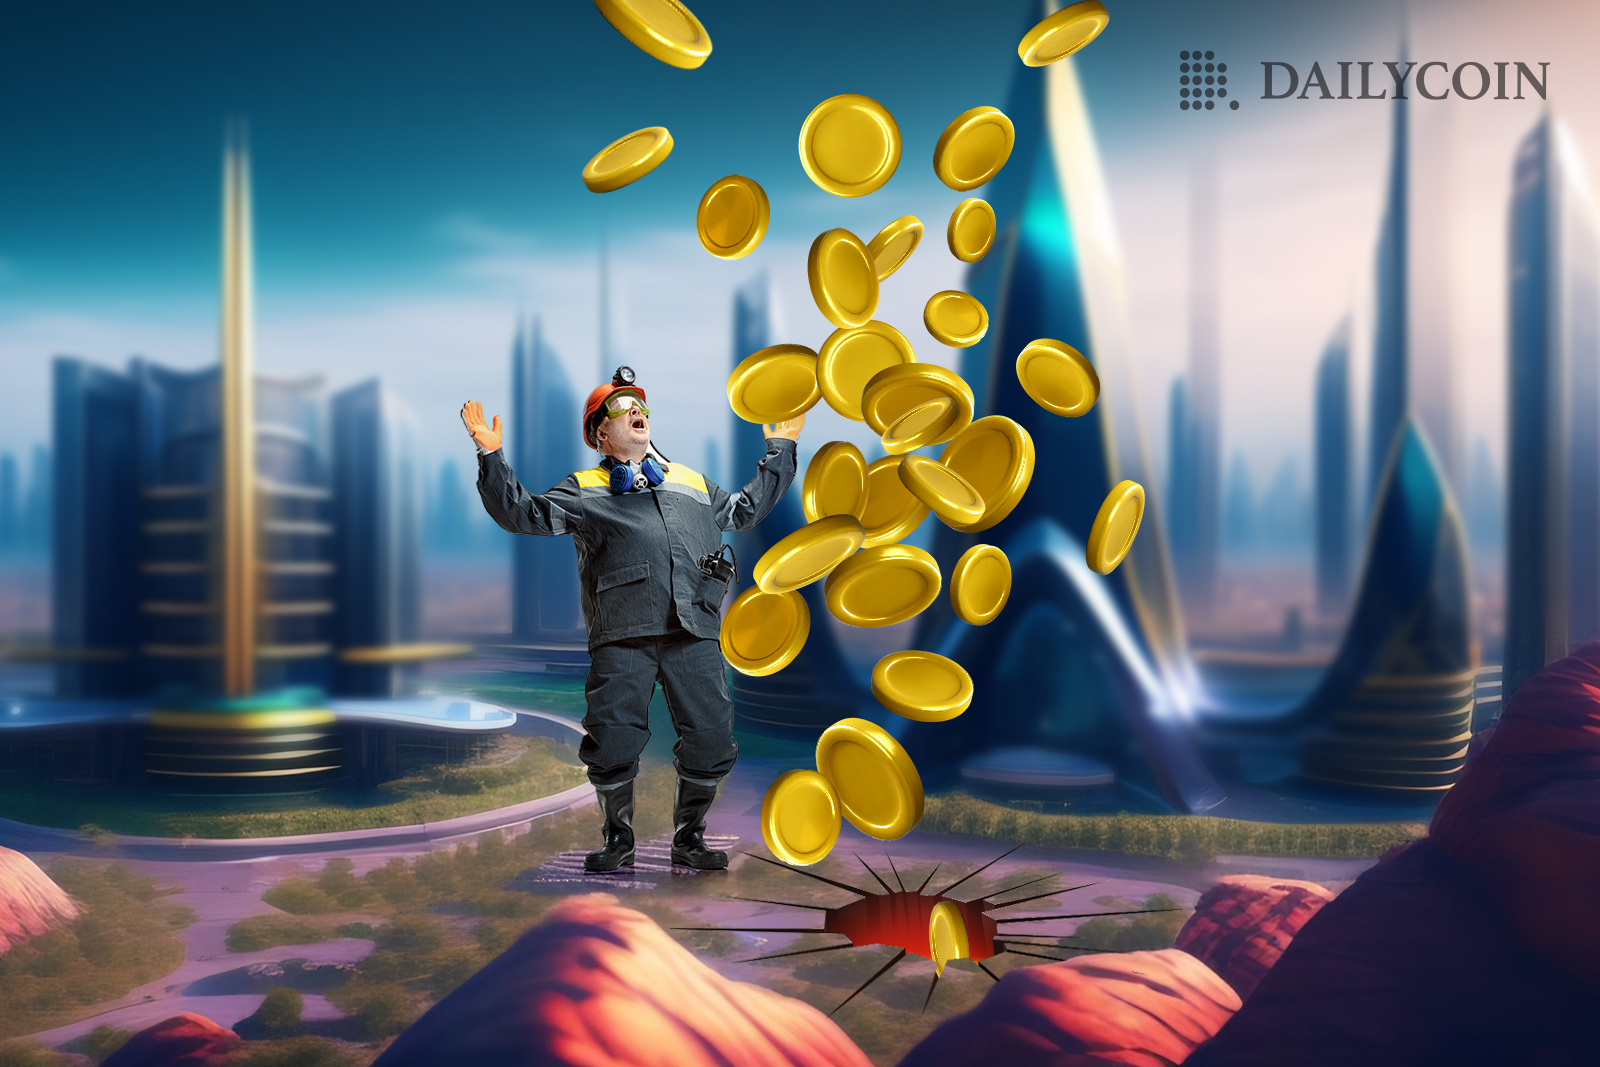 Miner excited about finding a gazer full of crypto coins outside the city.